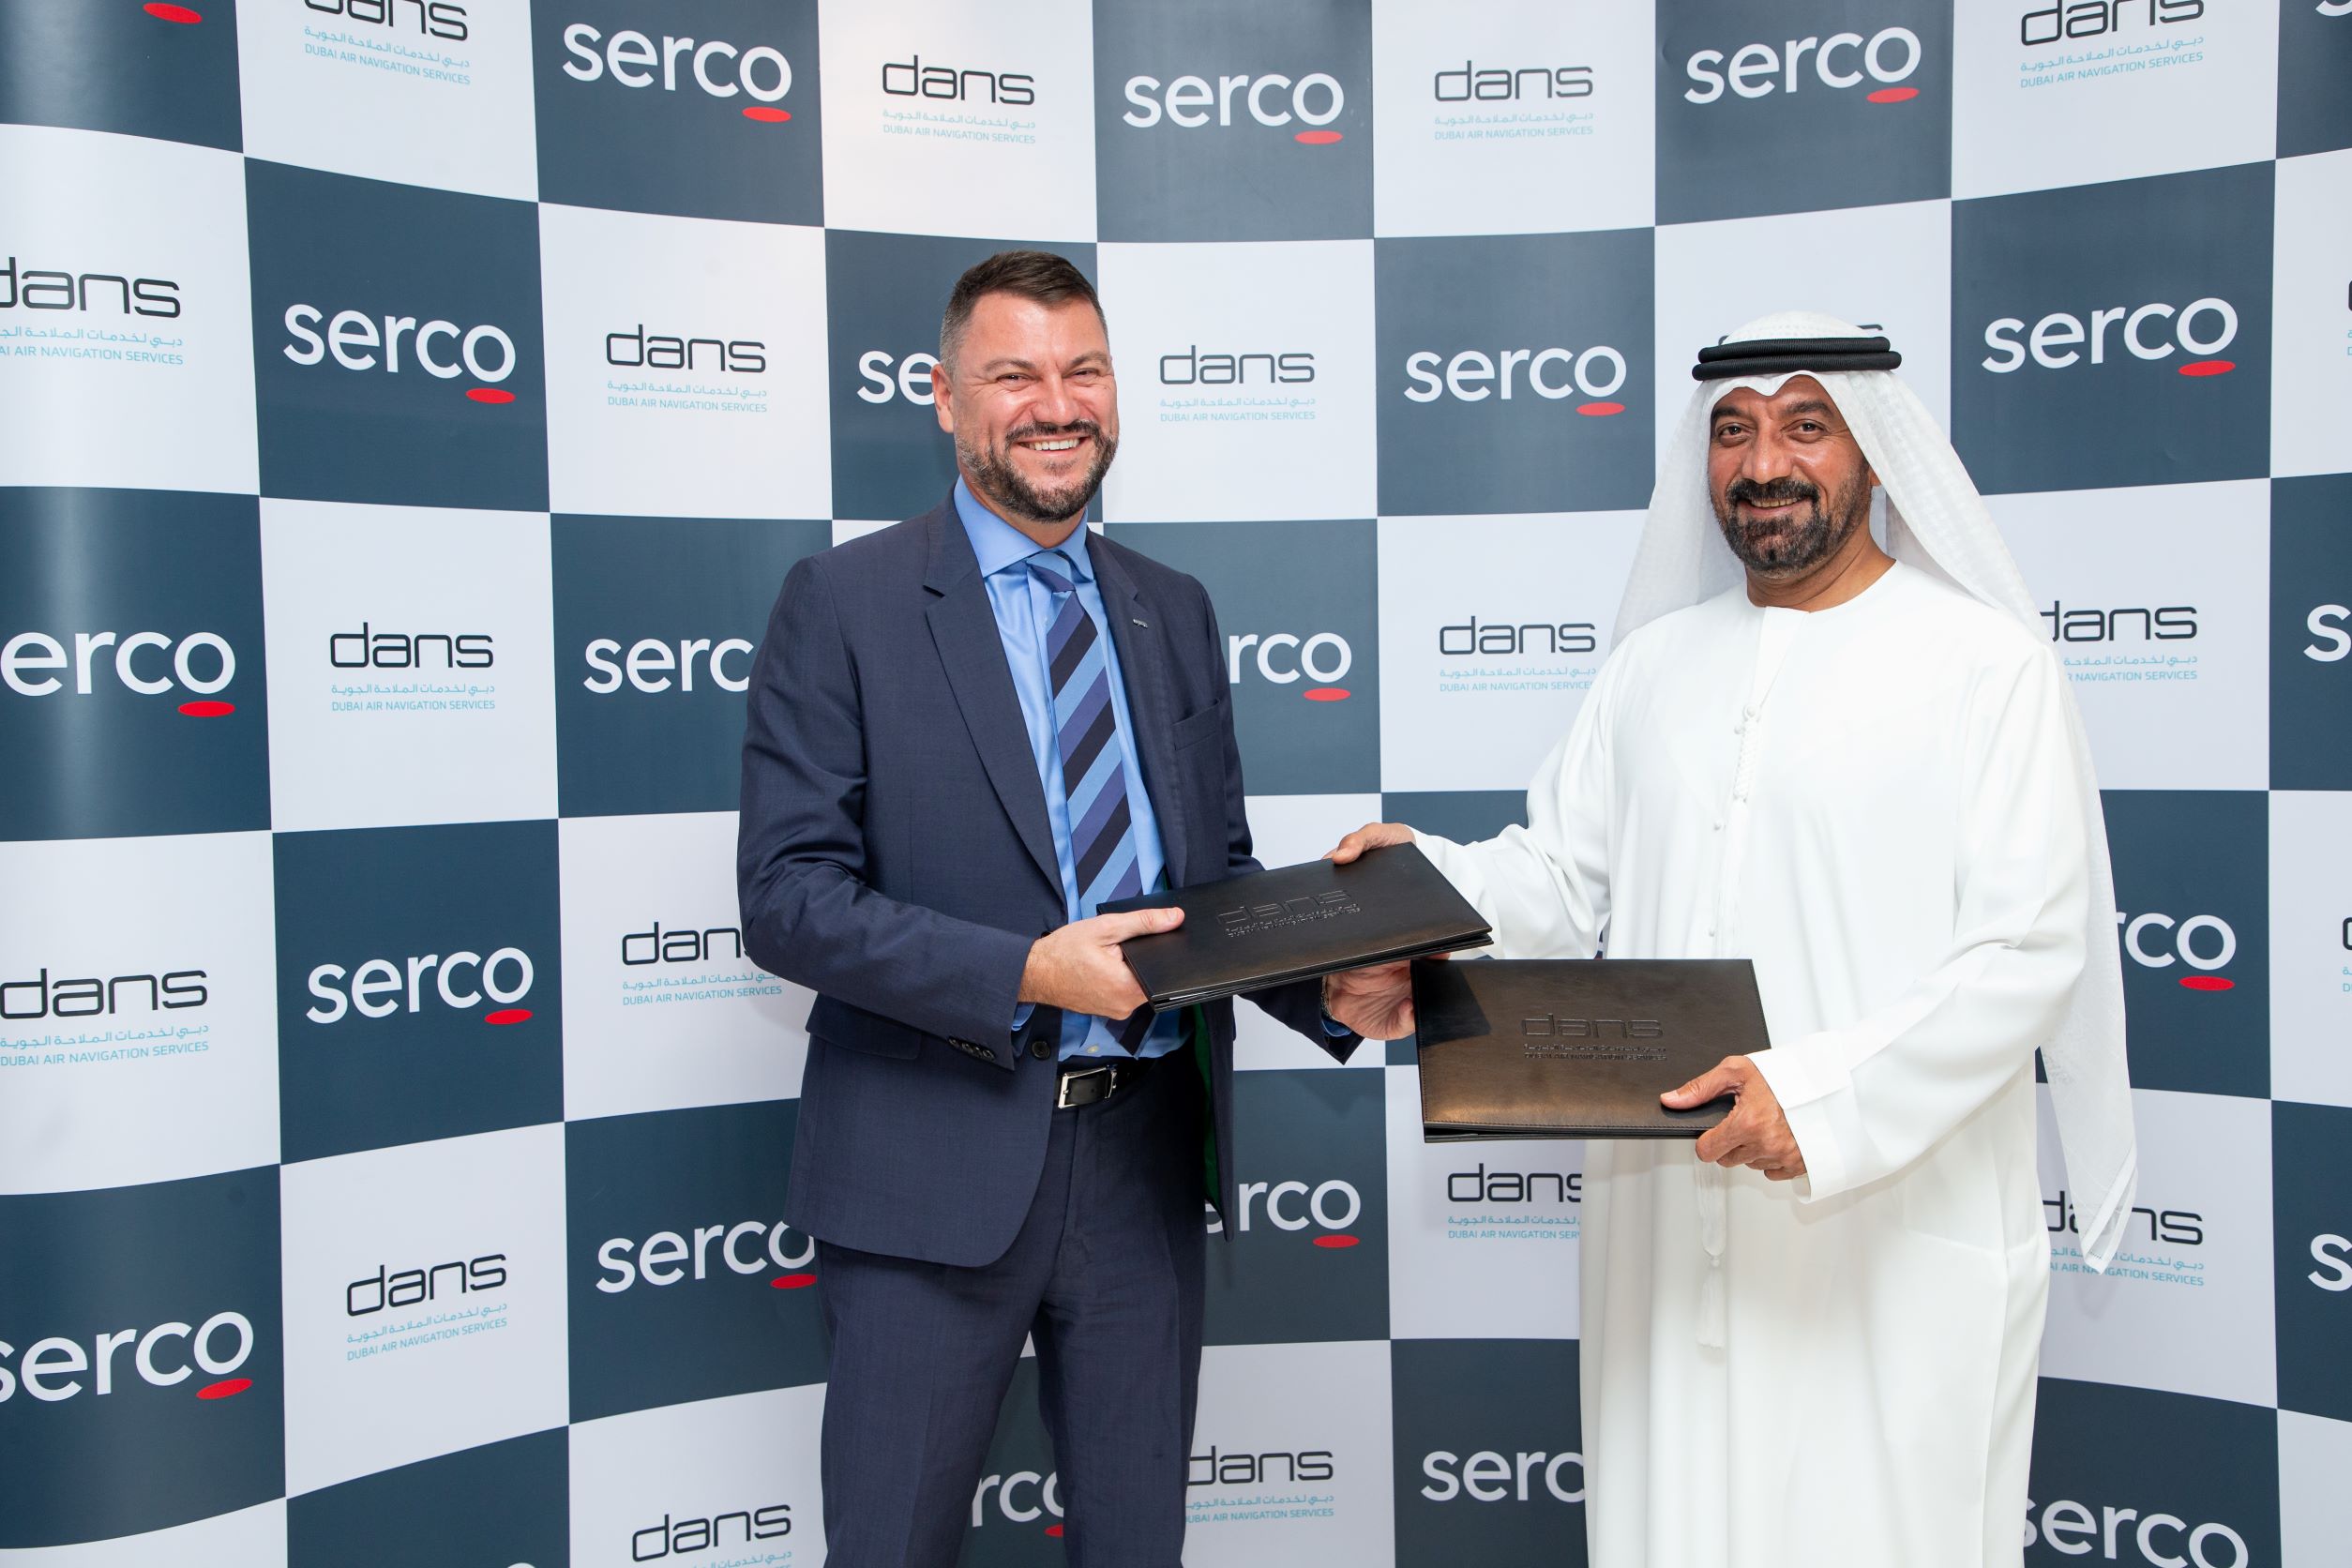 dans renew agreement with Serco 